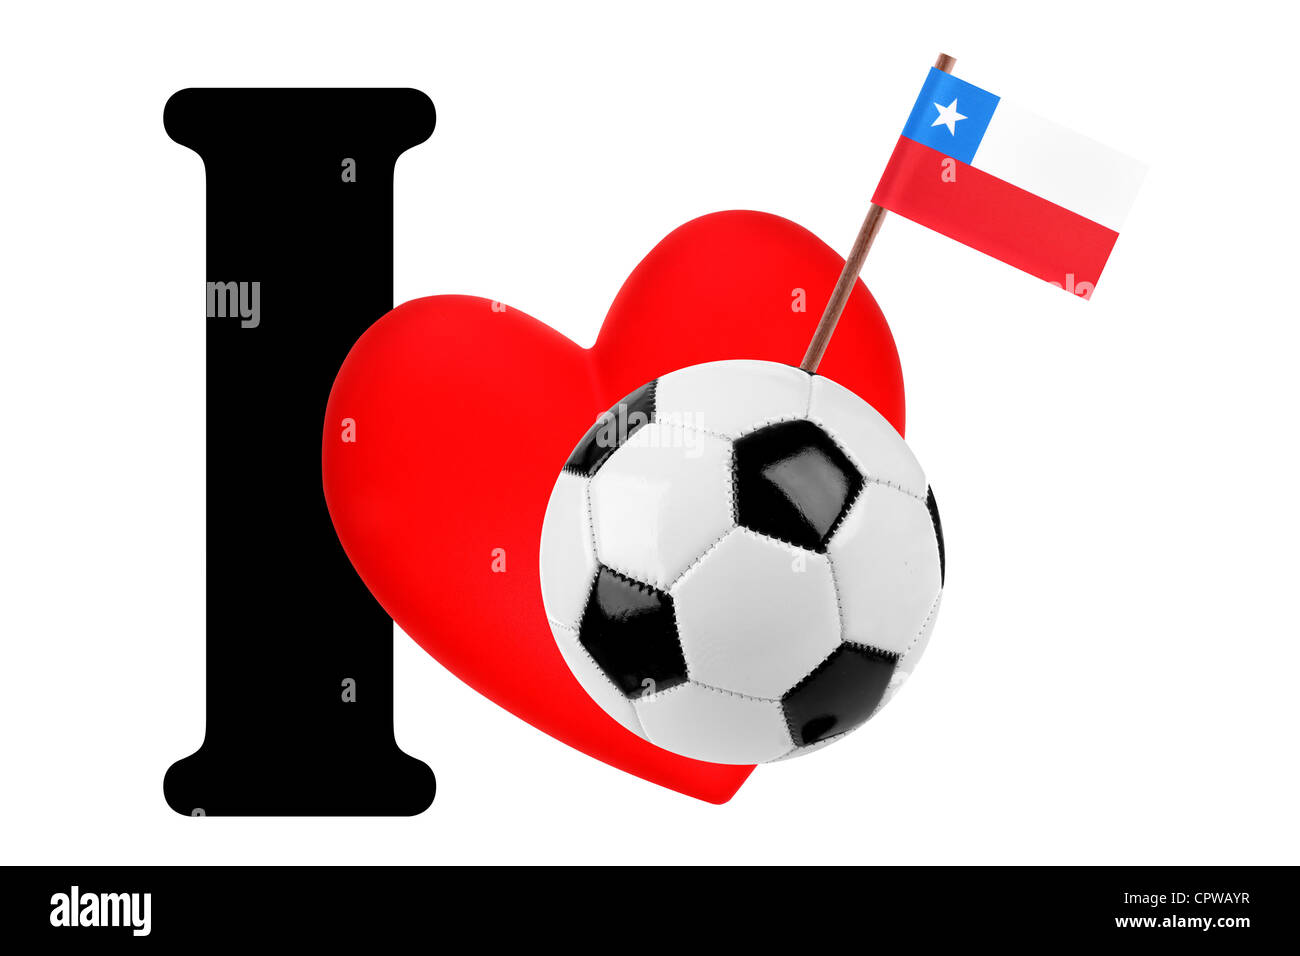 Small flag on a red heart and the word I to express love for the national flag of Chile Stock Photo